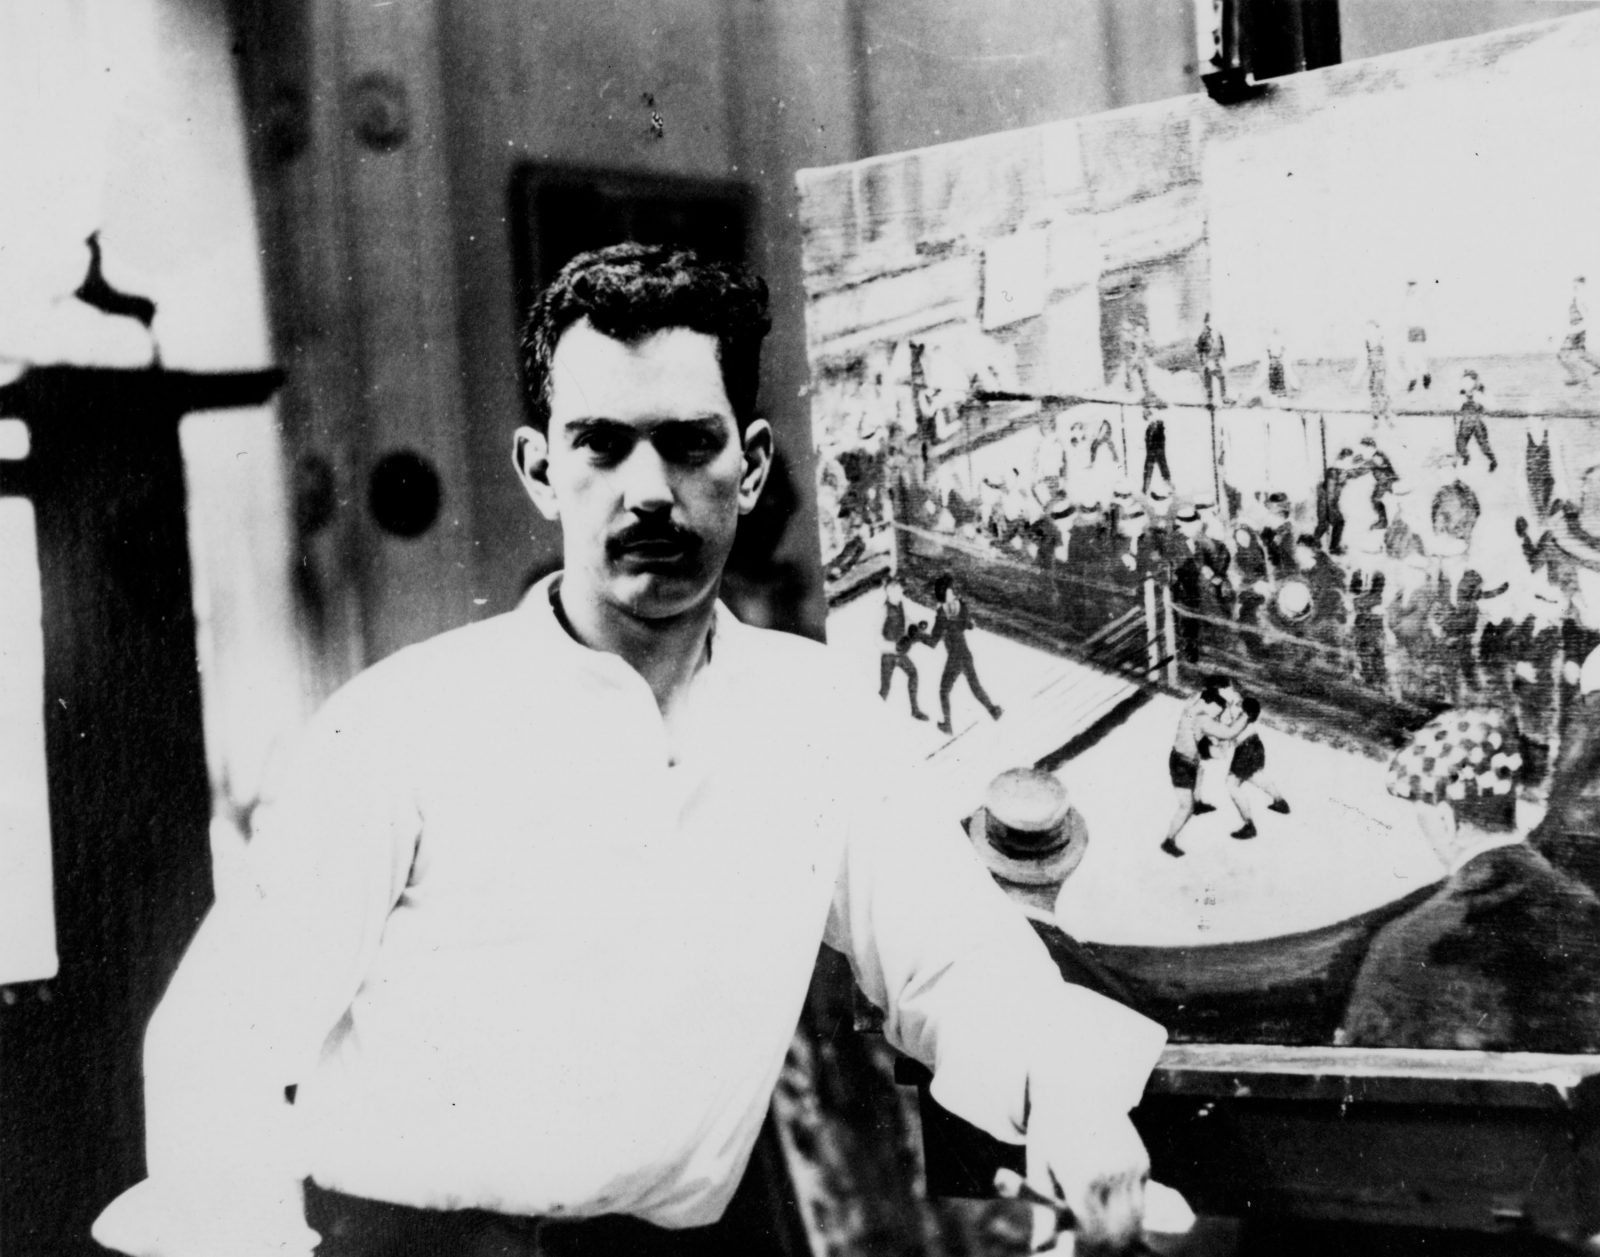 Calder photographed in front of his painting (1924)